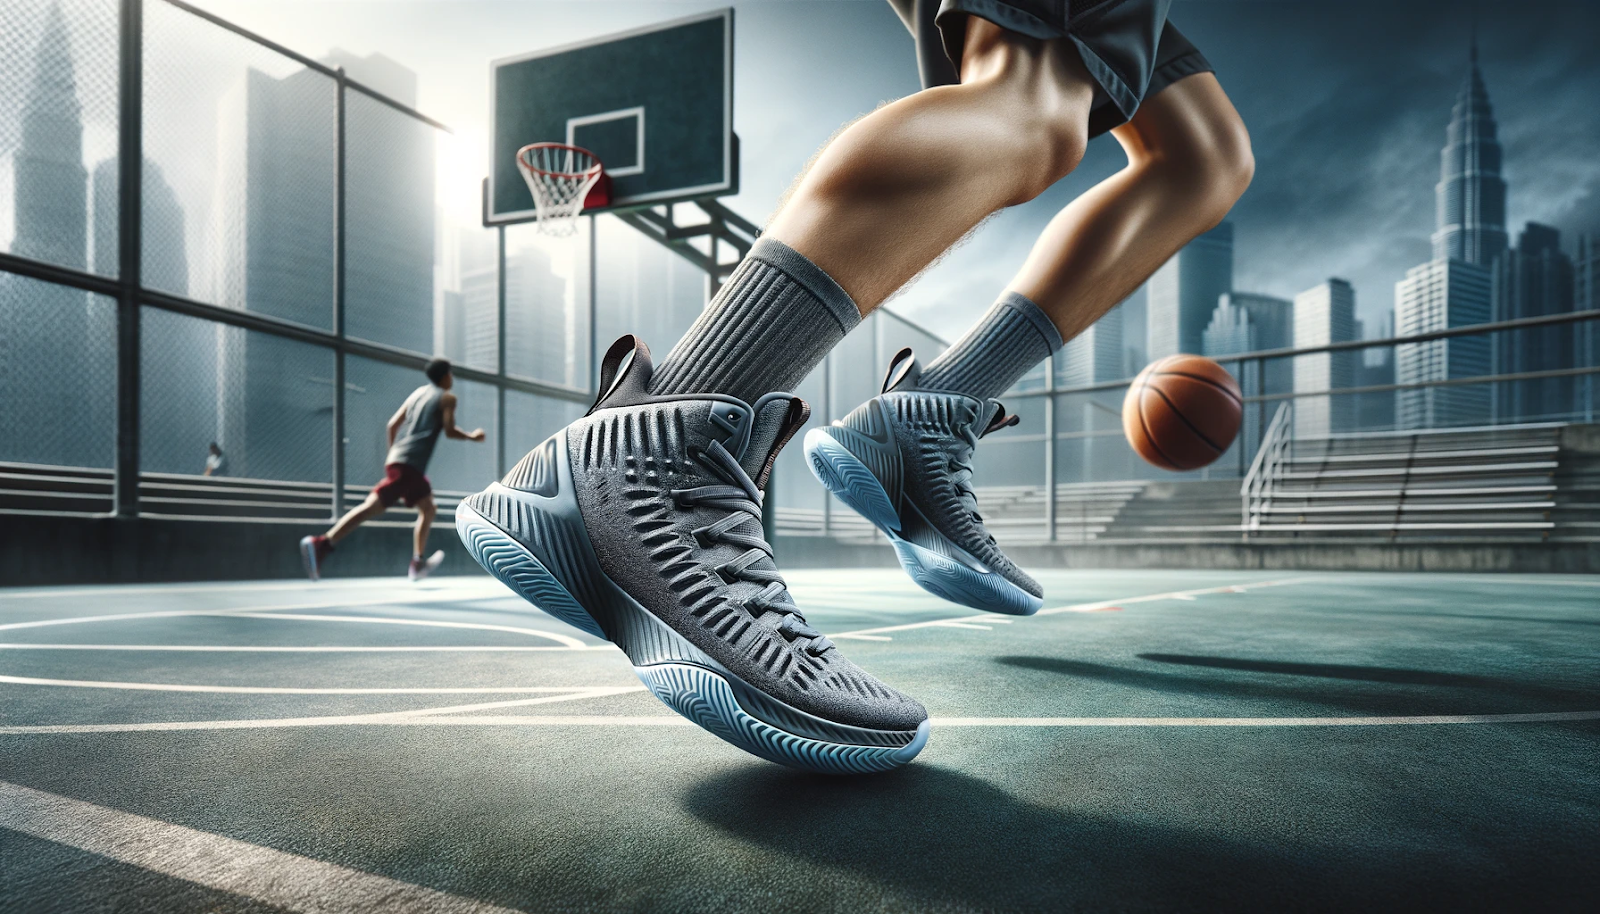 Running Dynamics in Basketball Shoes
